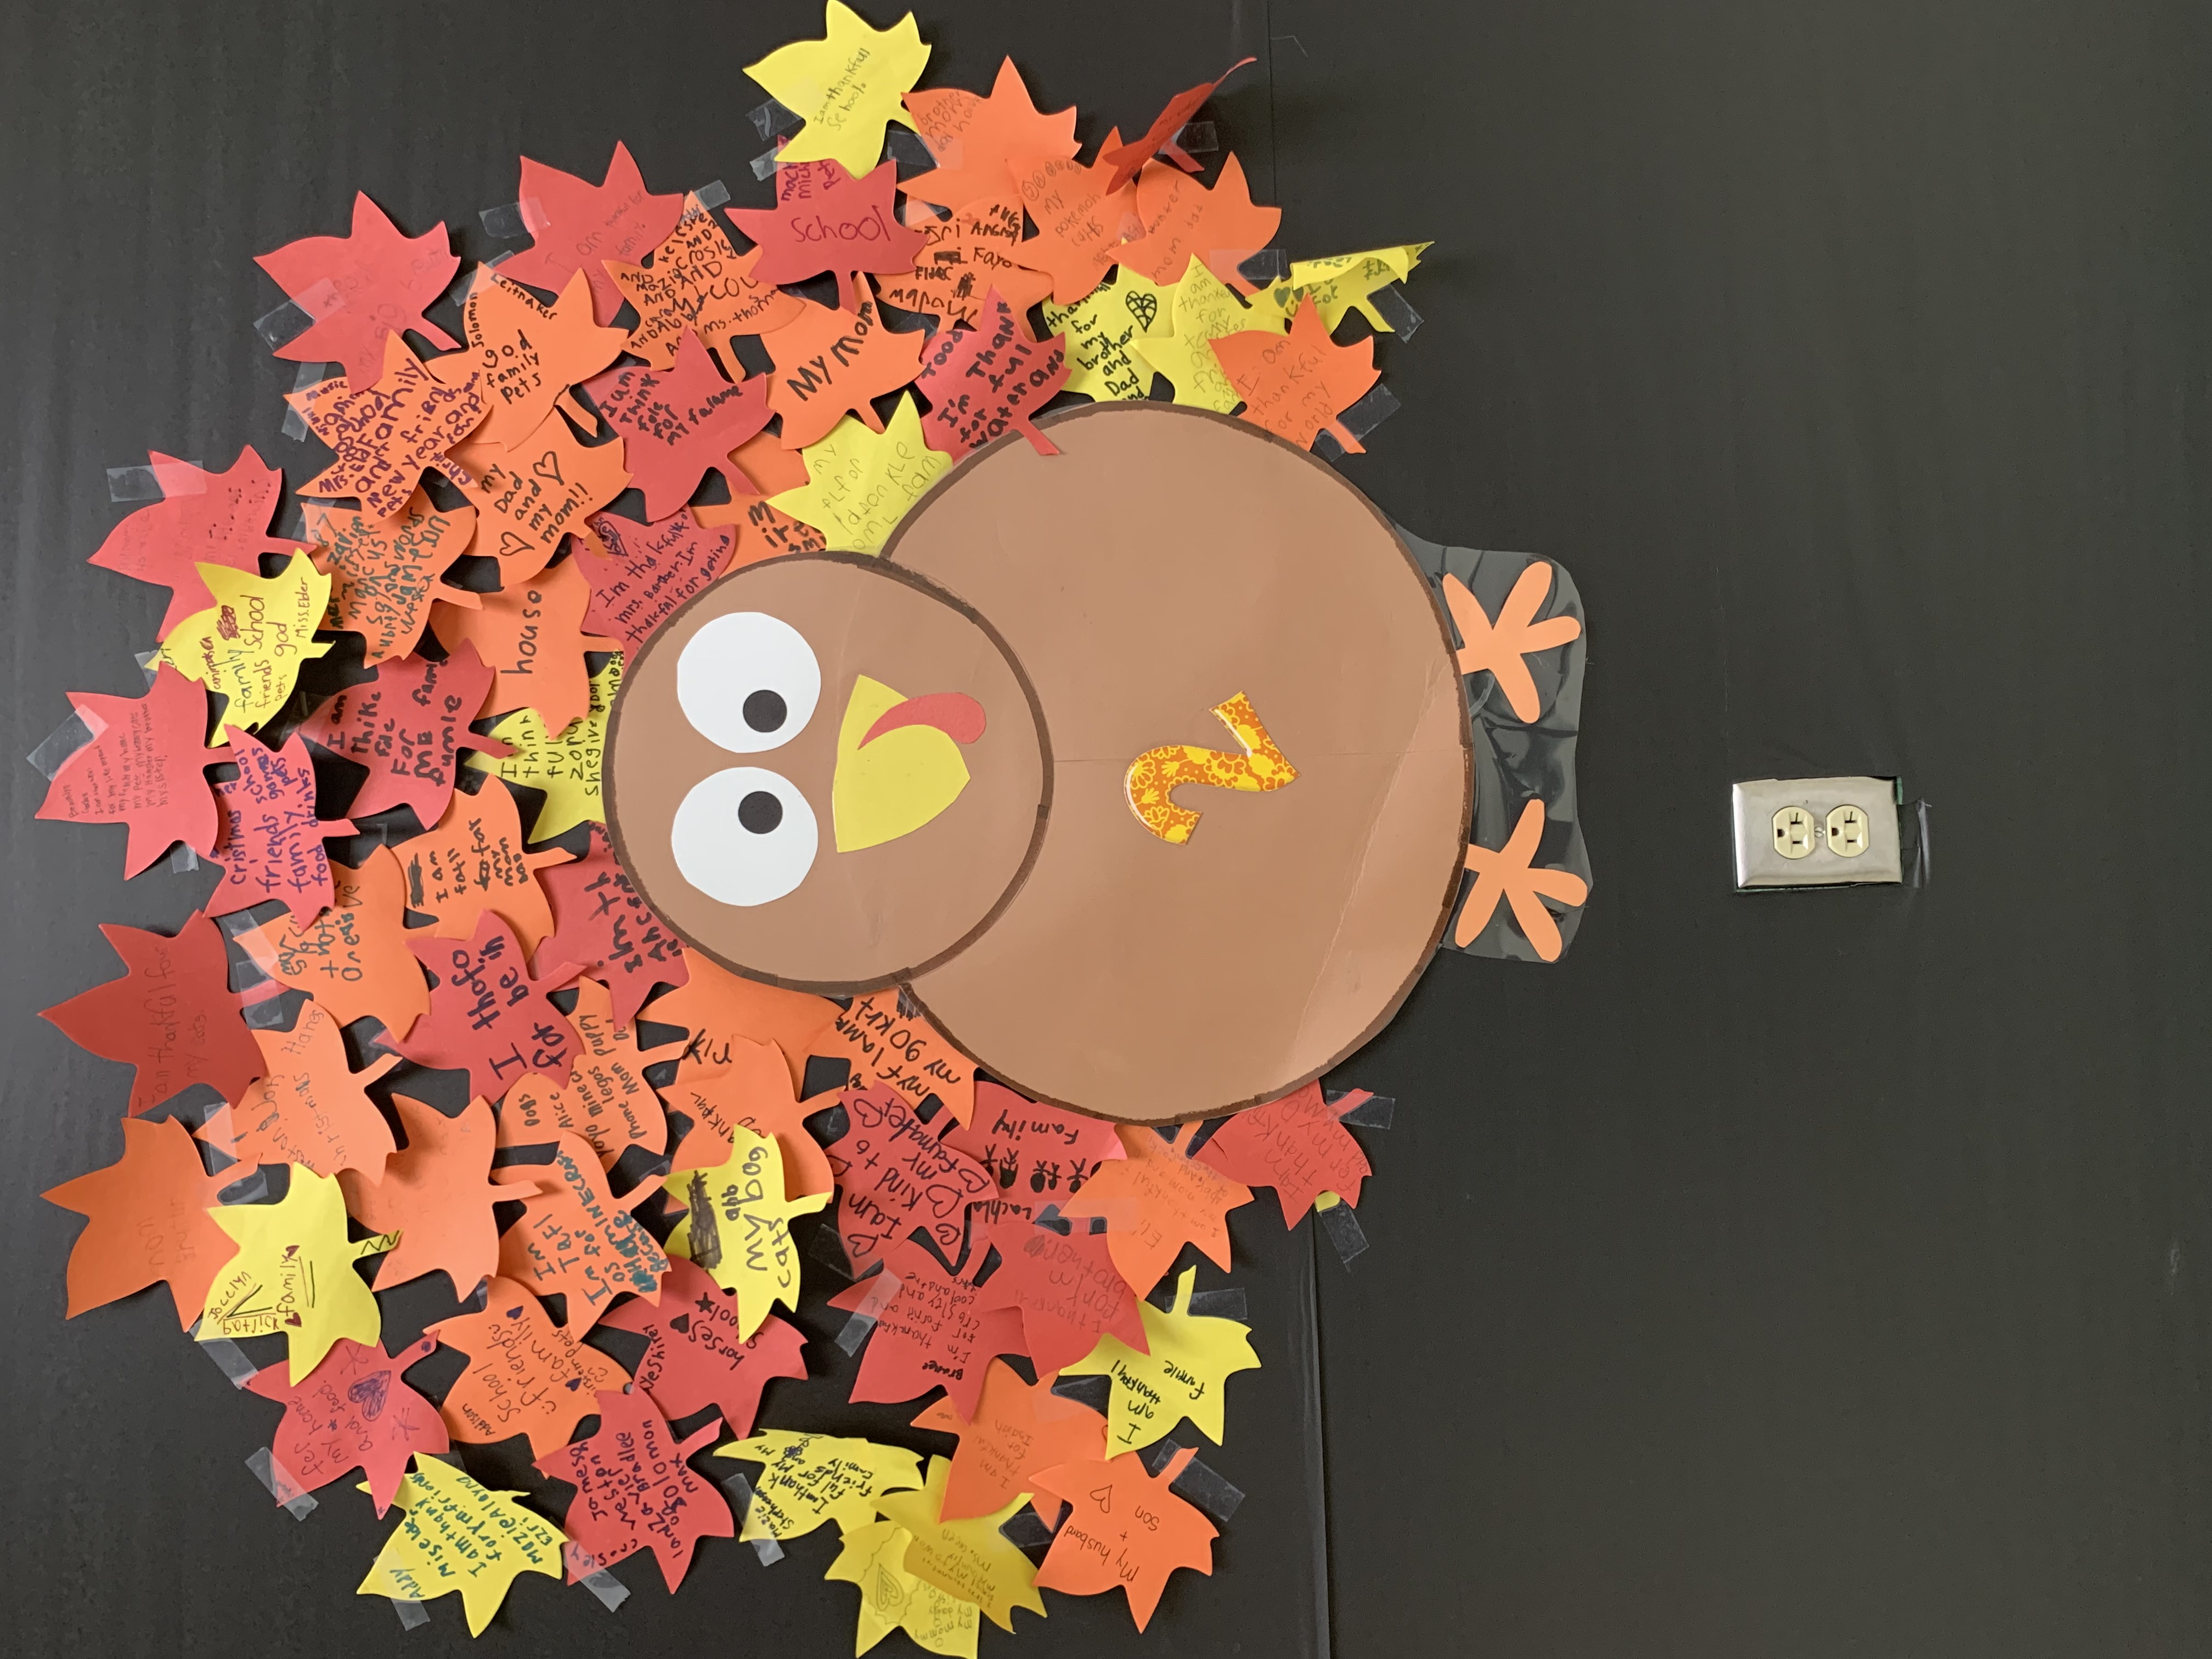 Second GradeTurkey representing people they are thankful for.